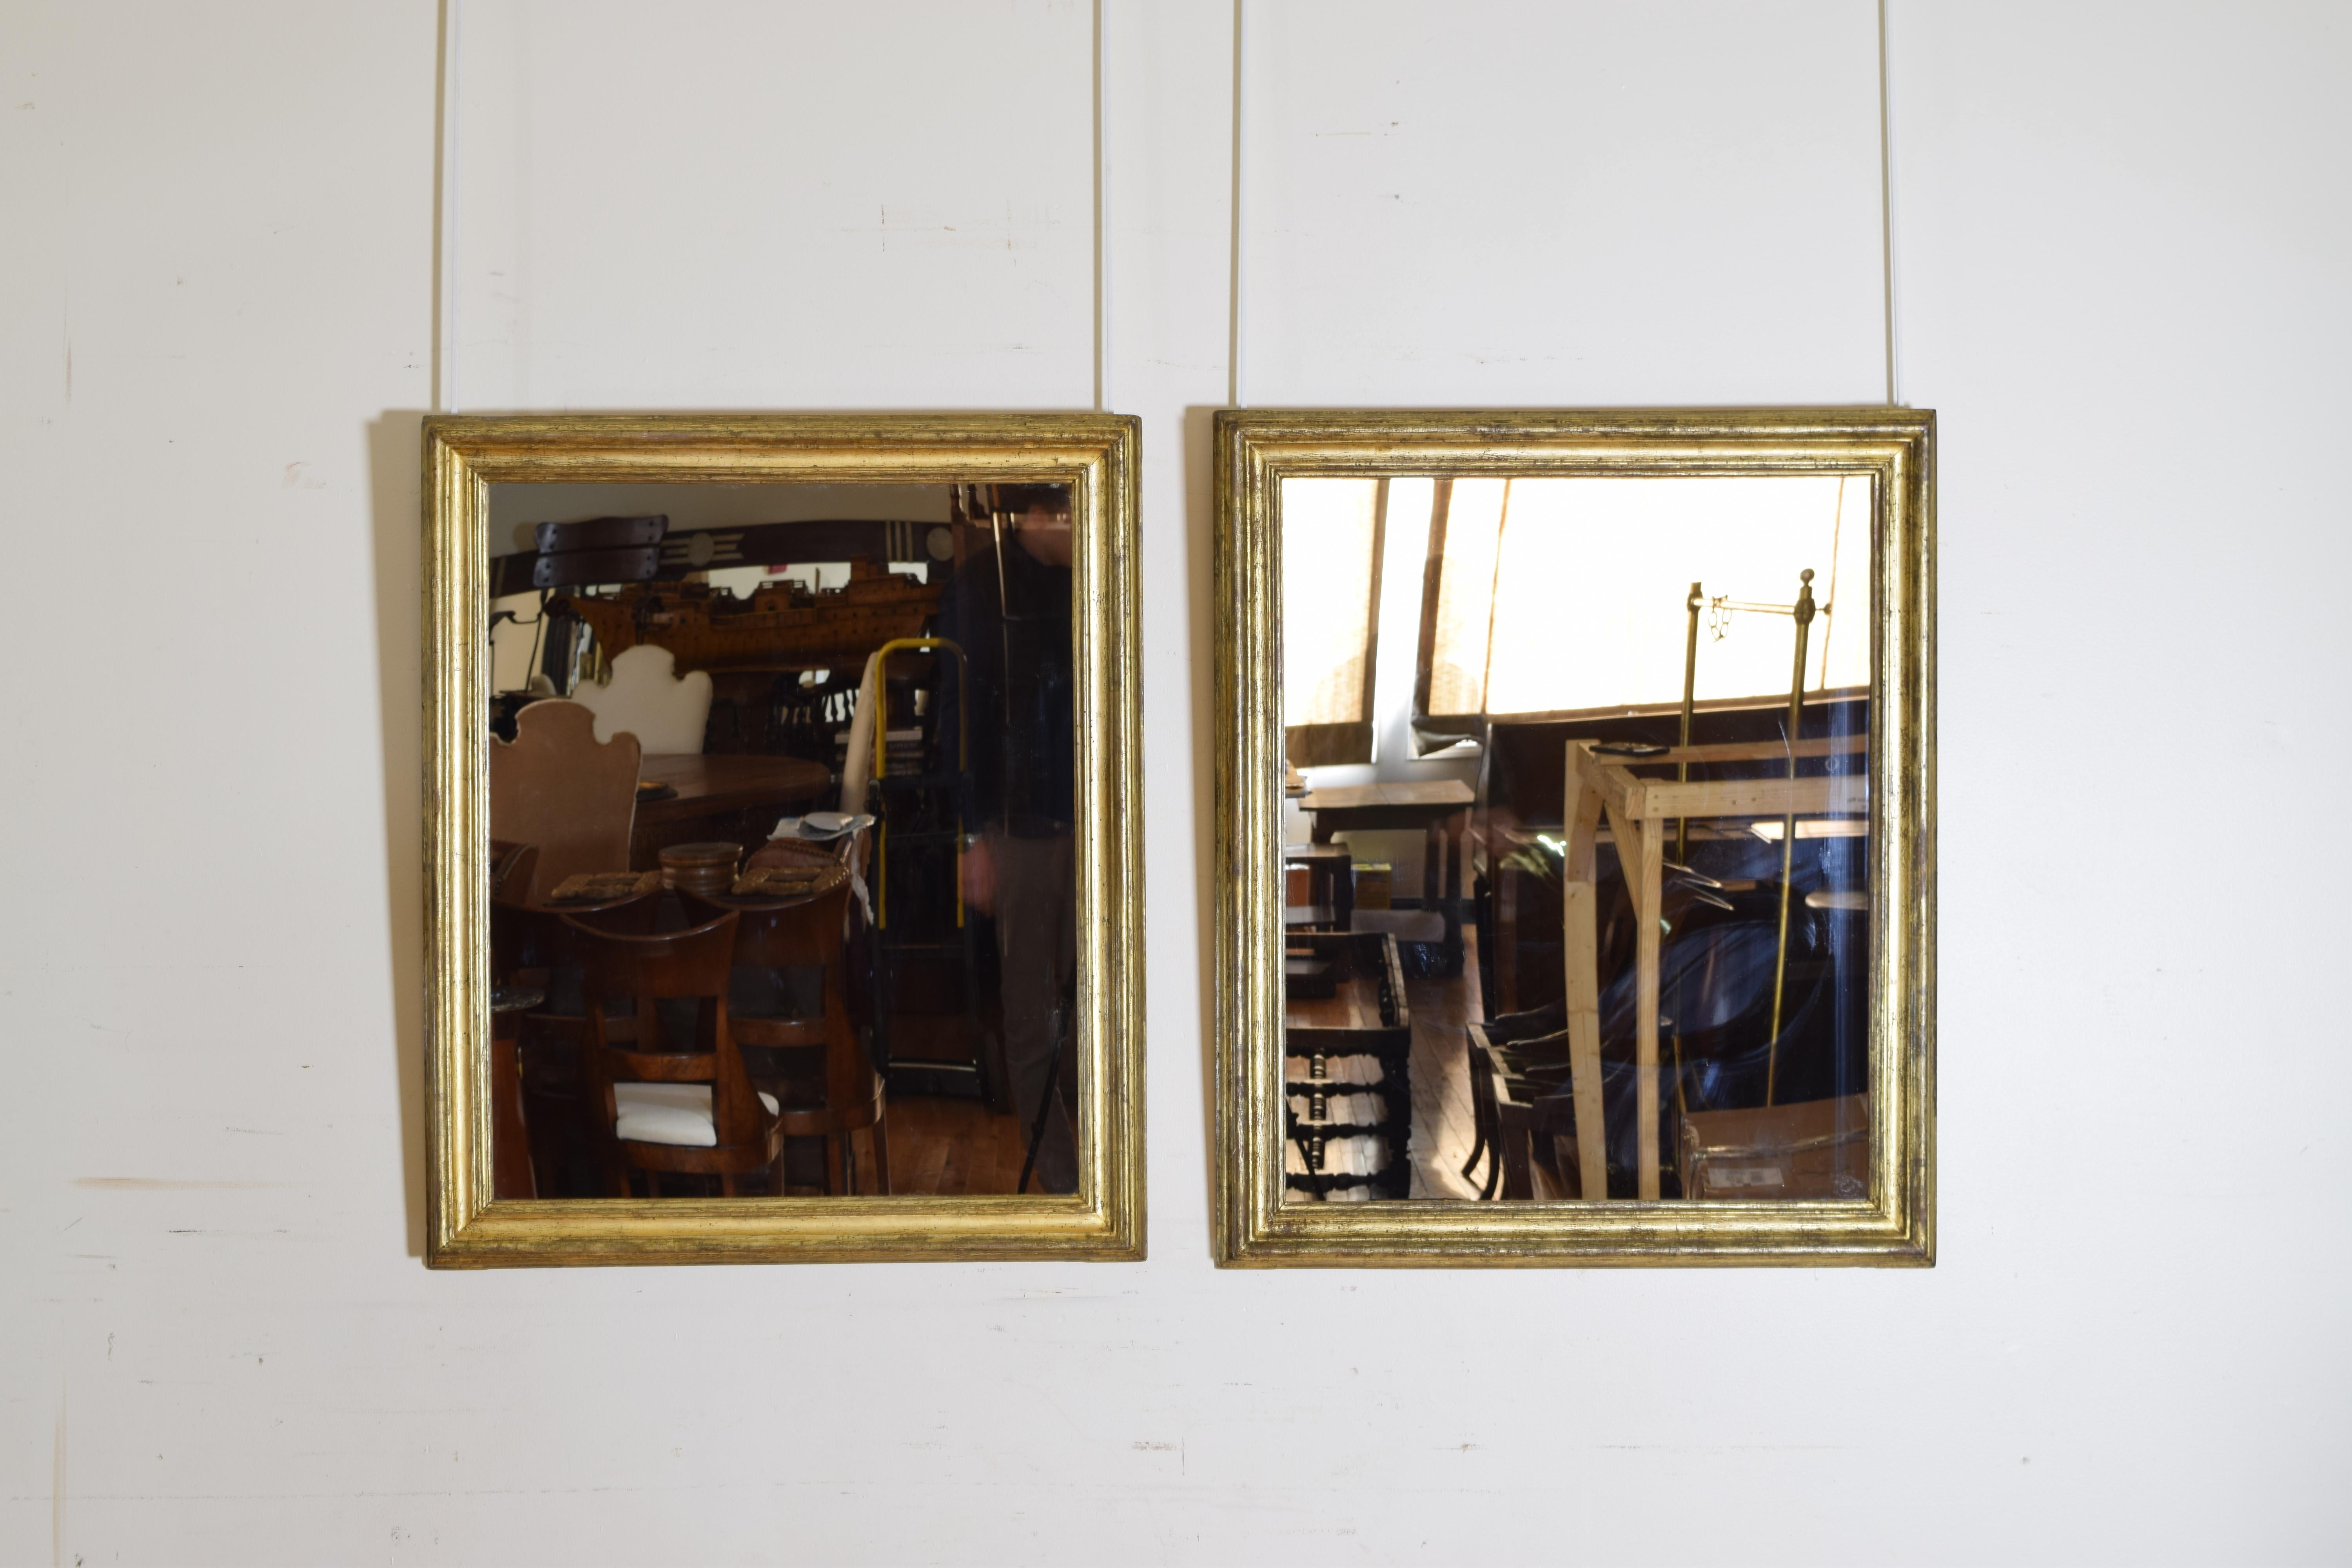 Each frame with several layers of moldings, covered in silver with amber lacquer, the process known in Italy as 